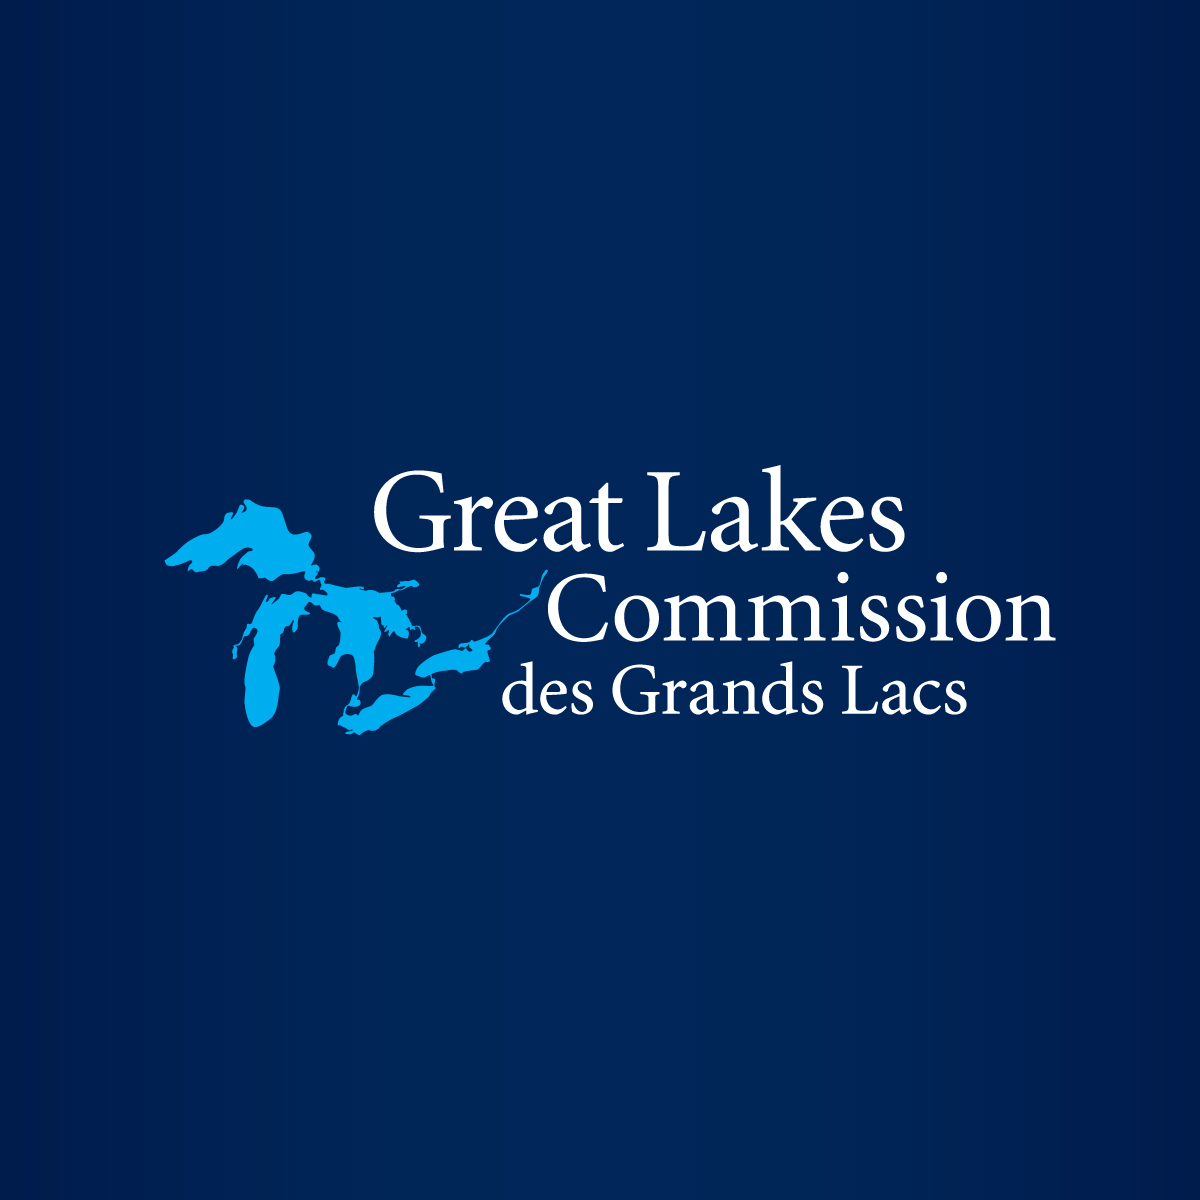 Keeping plastic waste from entering Great Lakes top priority for binational group